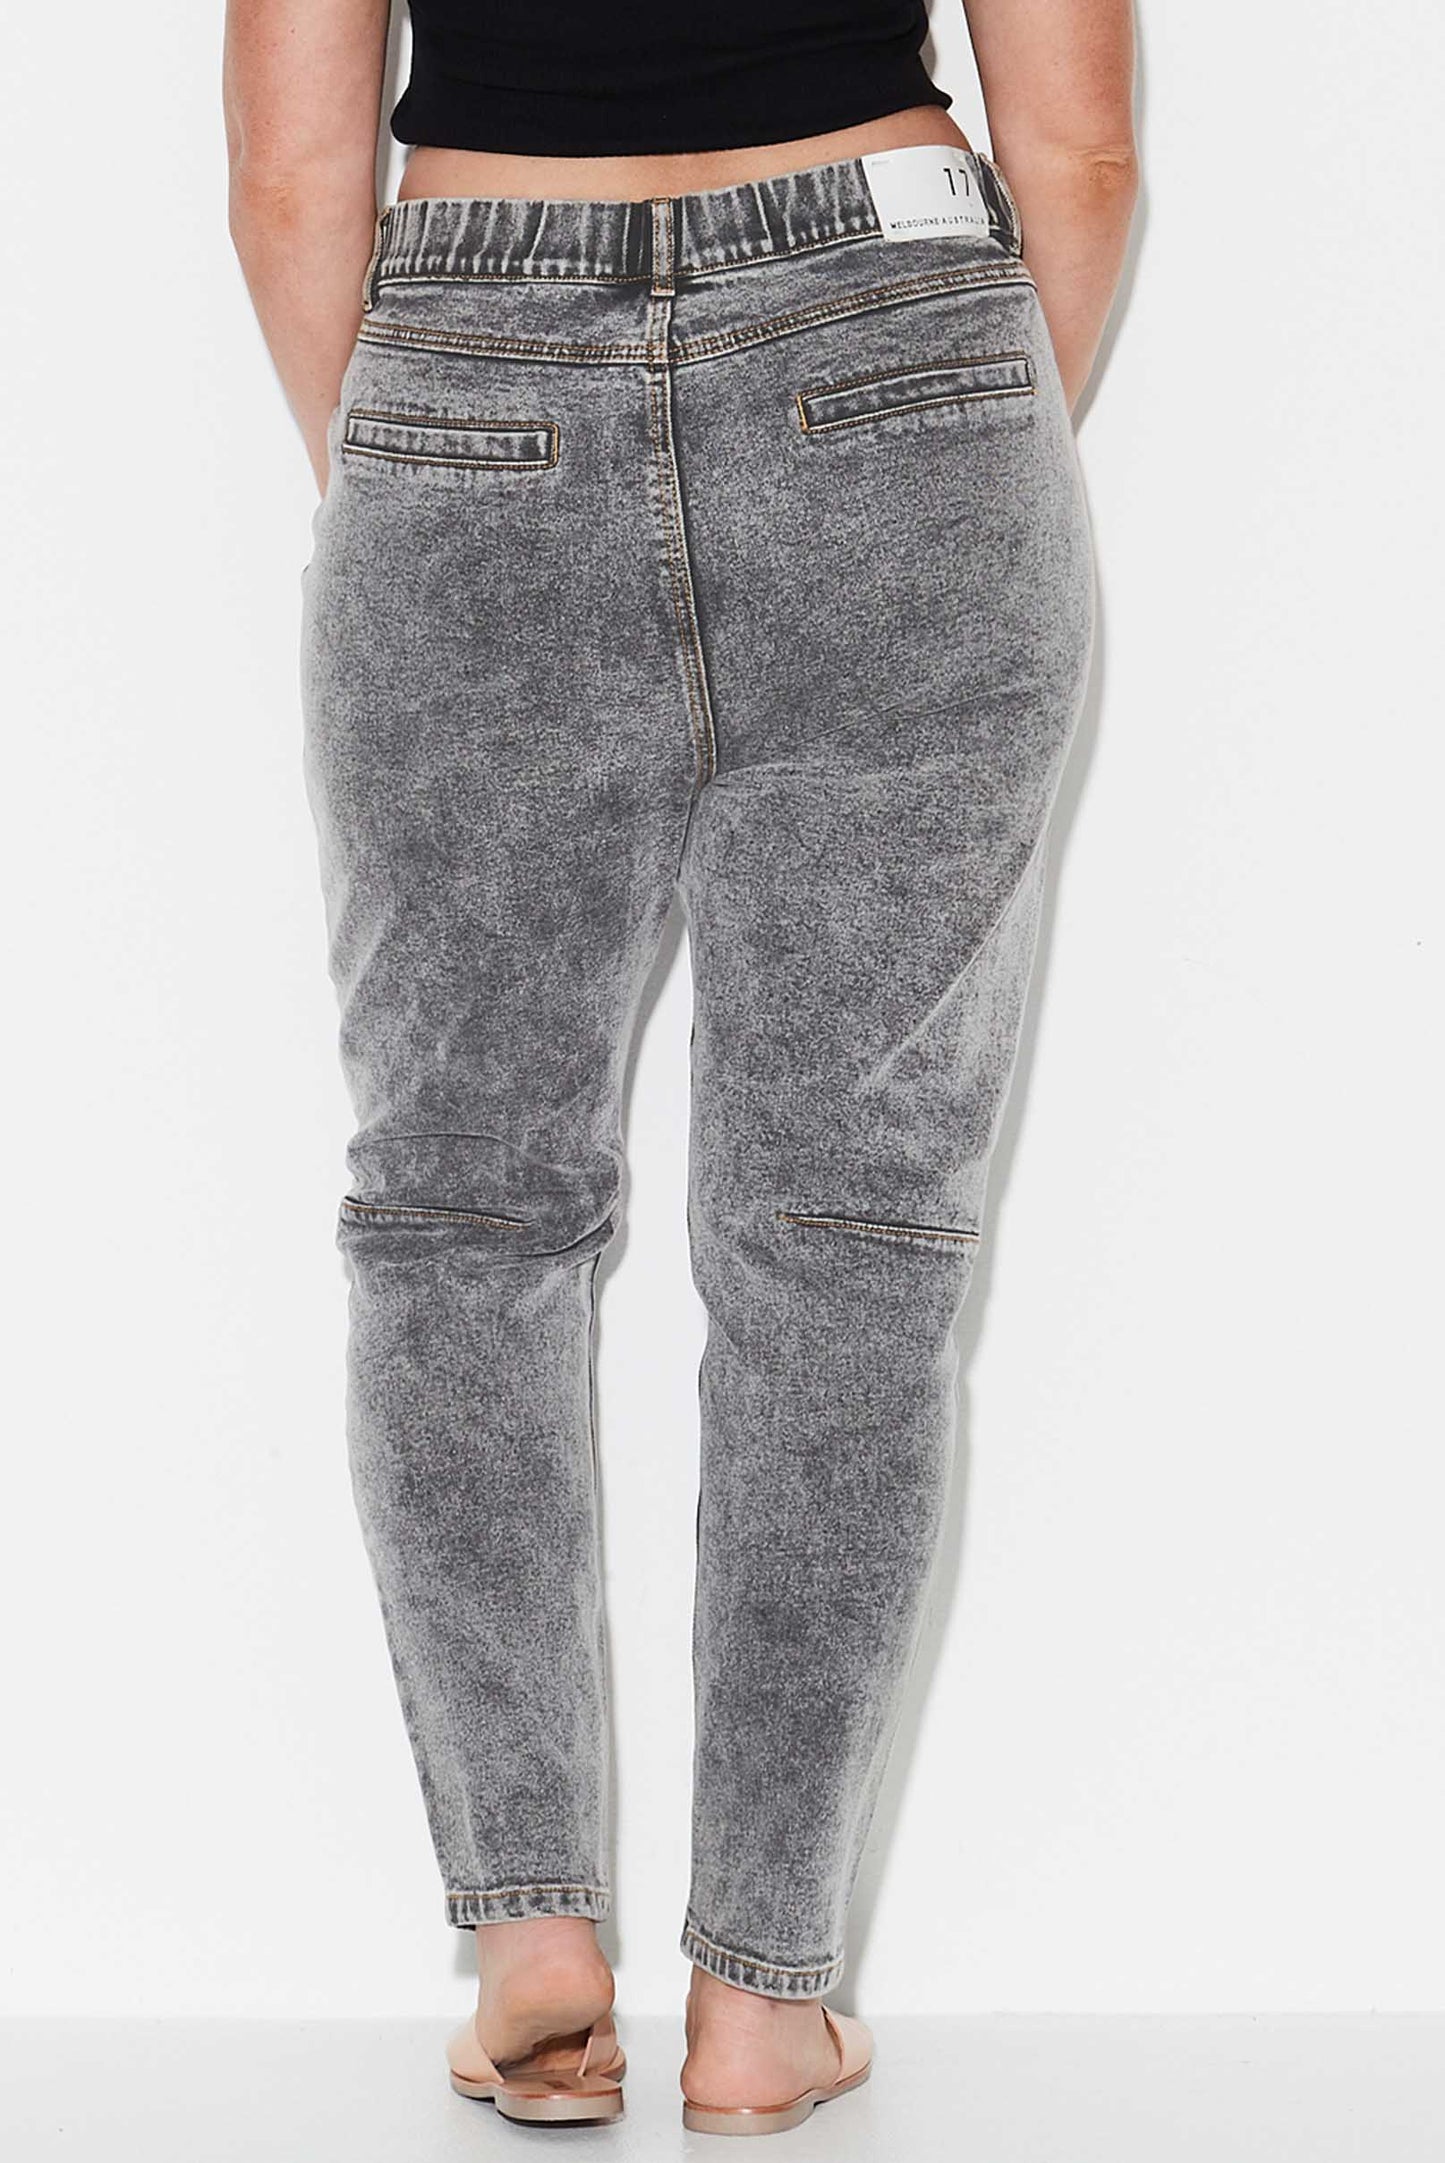 OUTSIDERS- Button Front Jeans - Grey Acid Wash